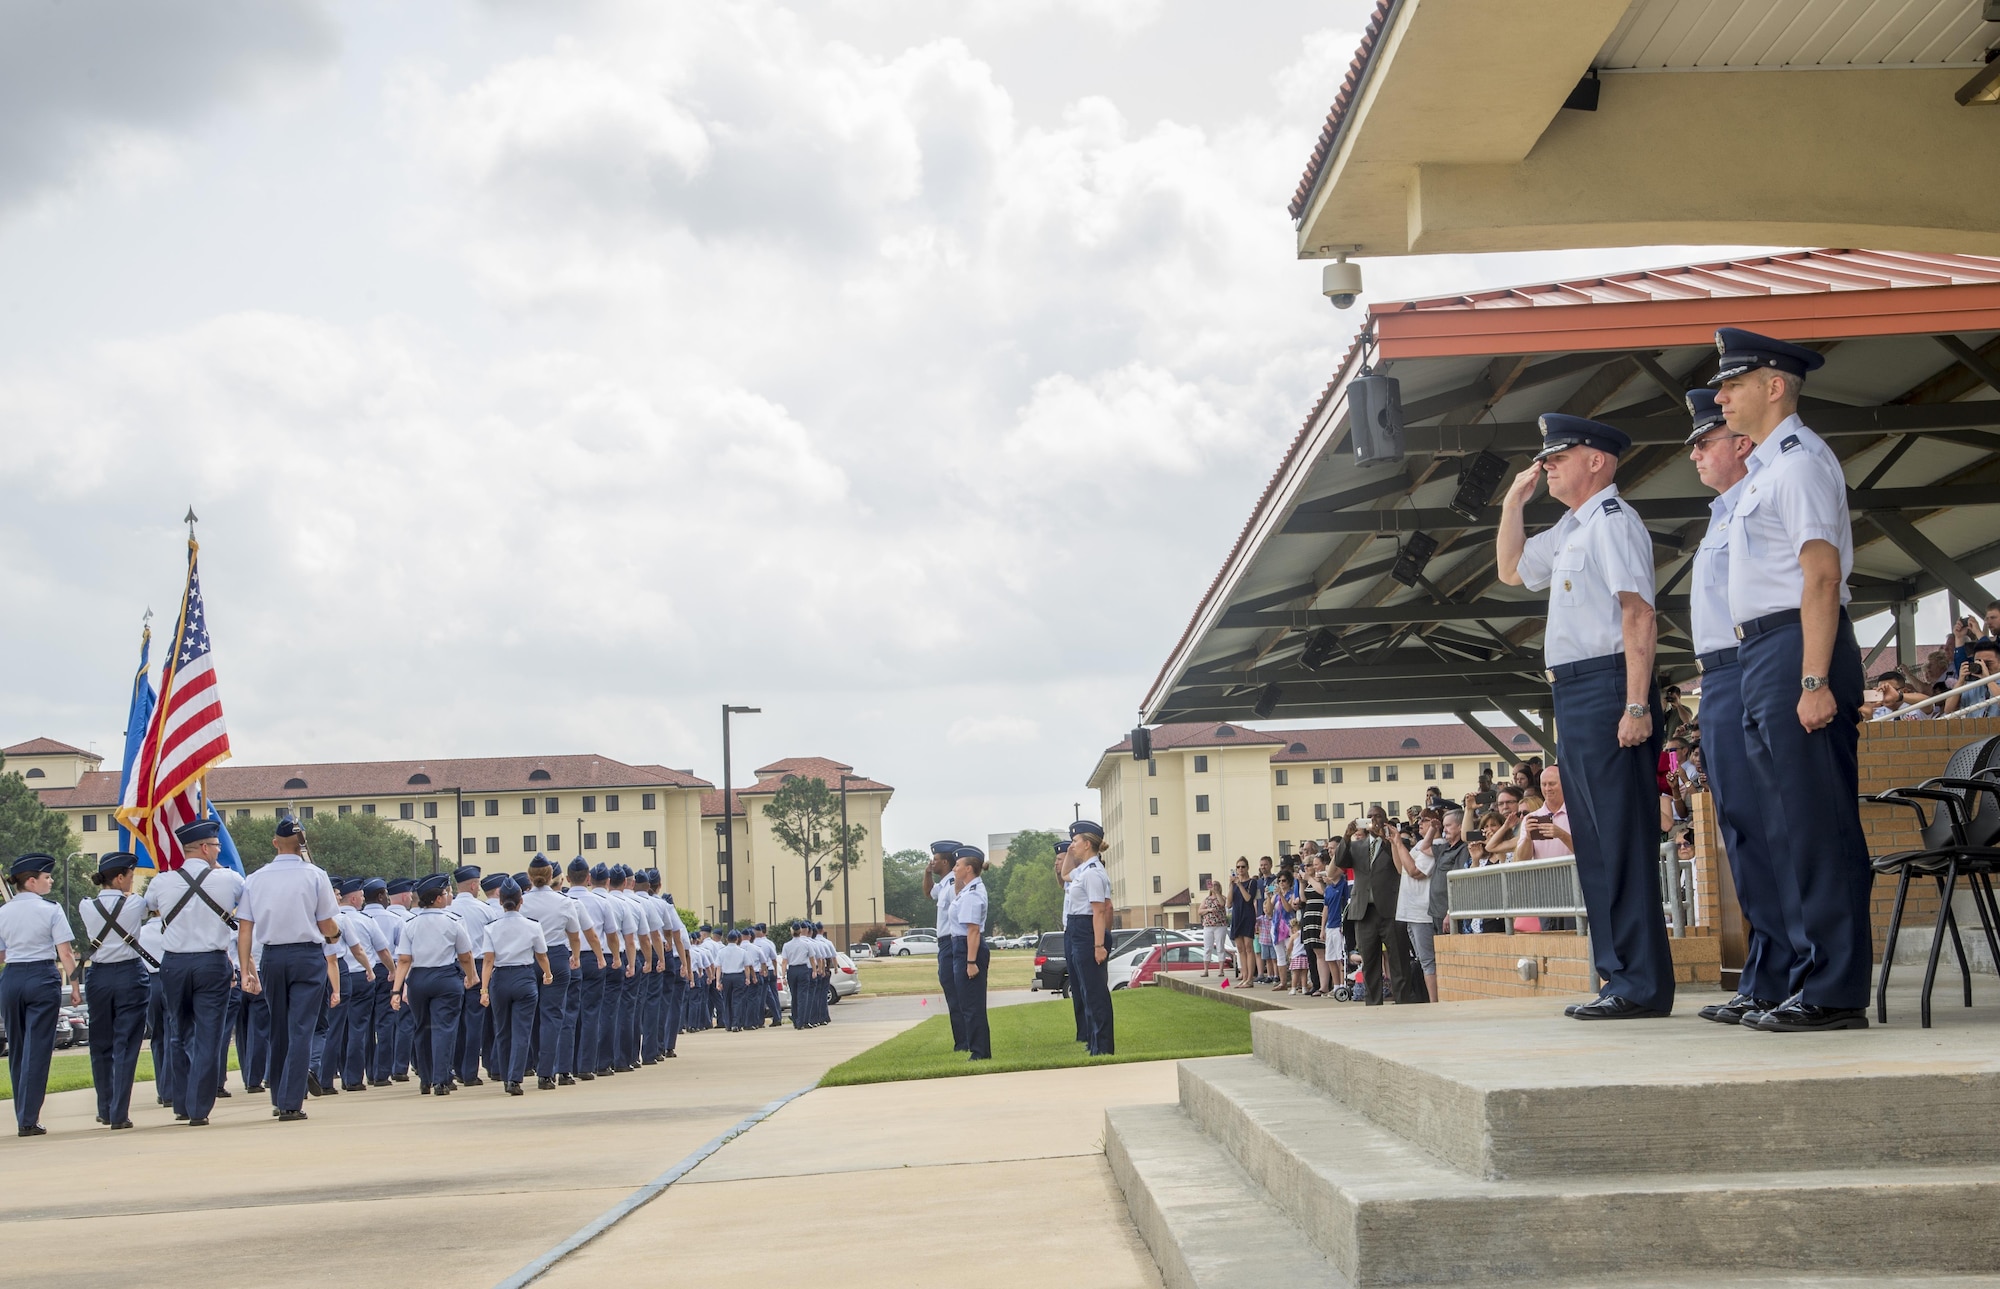 Col. Ken Backes, Air Force Reserve Officer Training Corps Southeast Region Commander, presides over an Officer Training School Commissioned Officer Training graduation, April 28, 2017, Maxwell Air Force Base, Ala. Today, Backes retired after serving 10 years enlisted and 30 years as an officer, totaling to 40 years in service. (U.S. Air Force photo/ Senior Airman Alexa Culbert)